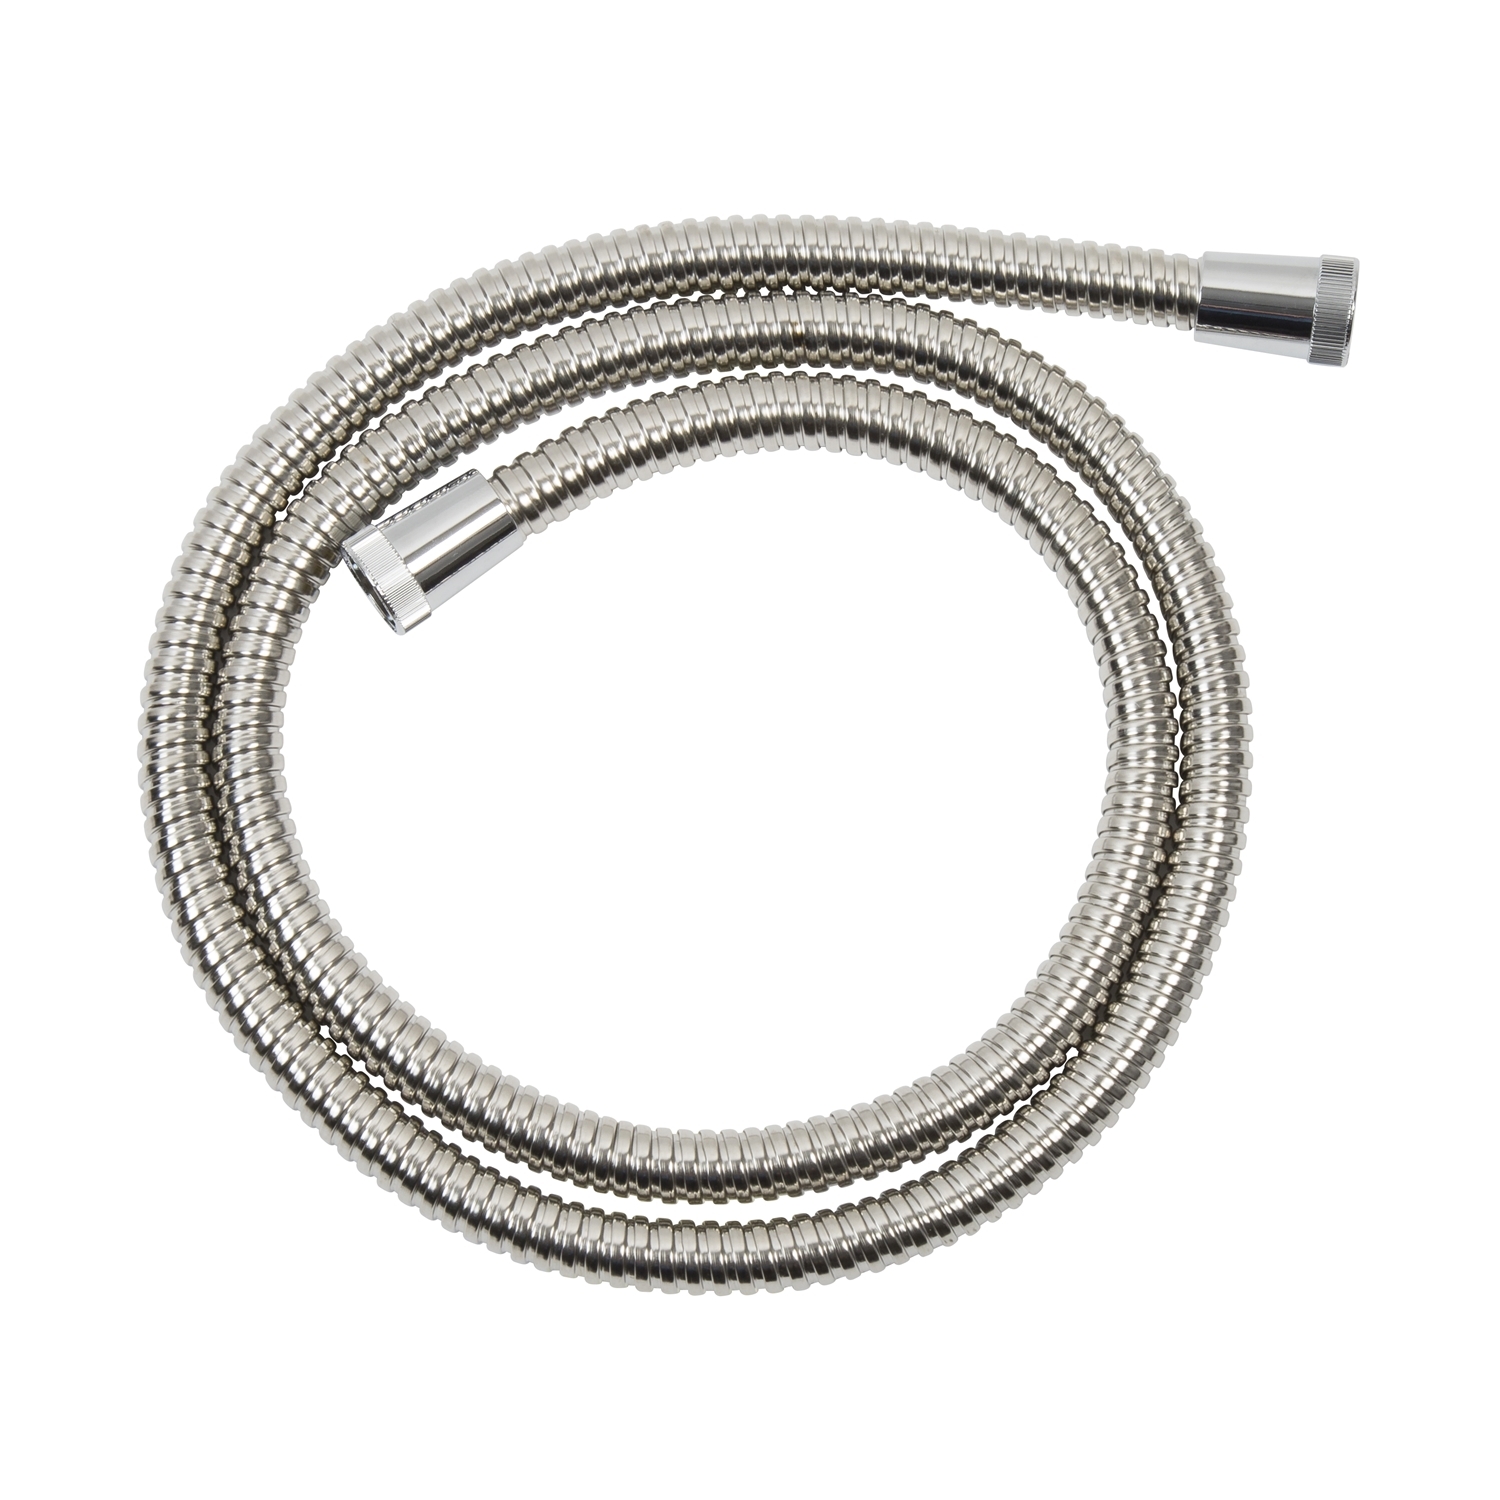 1.5m Stainless Steel Shower Hose - Silver Image